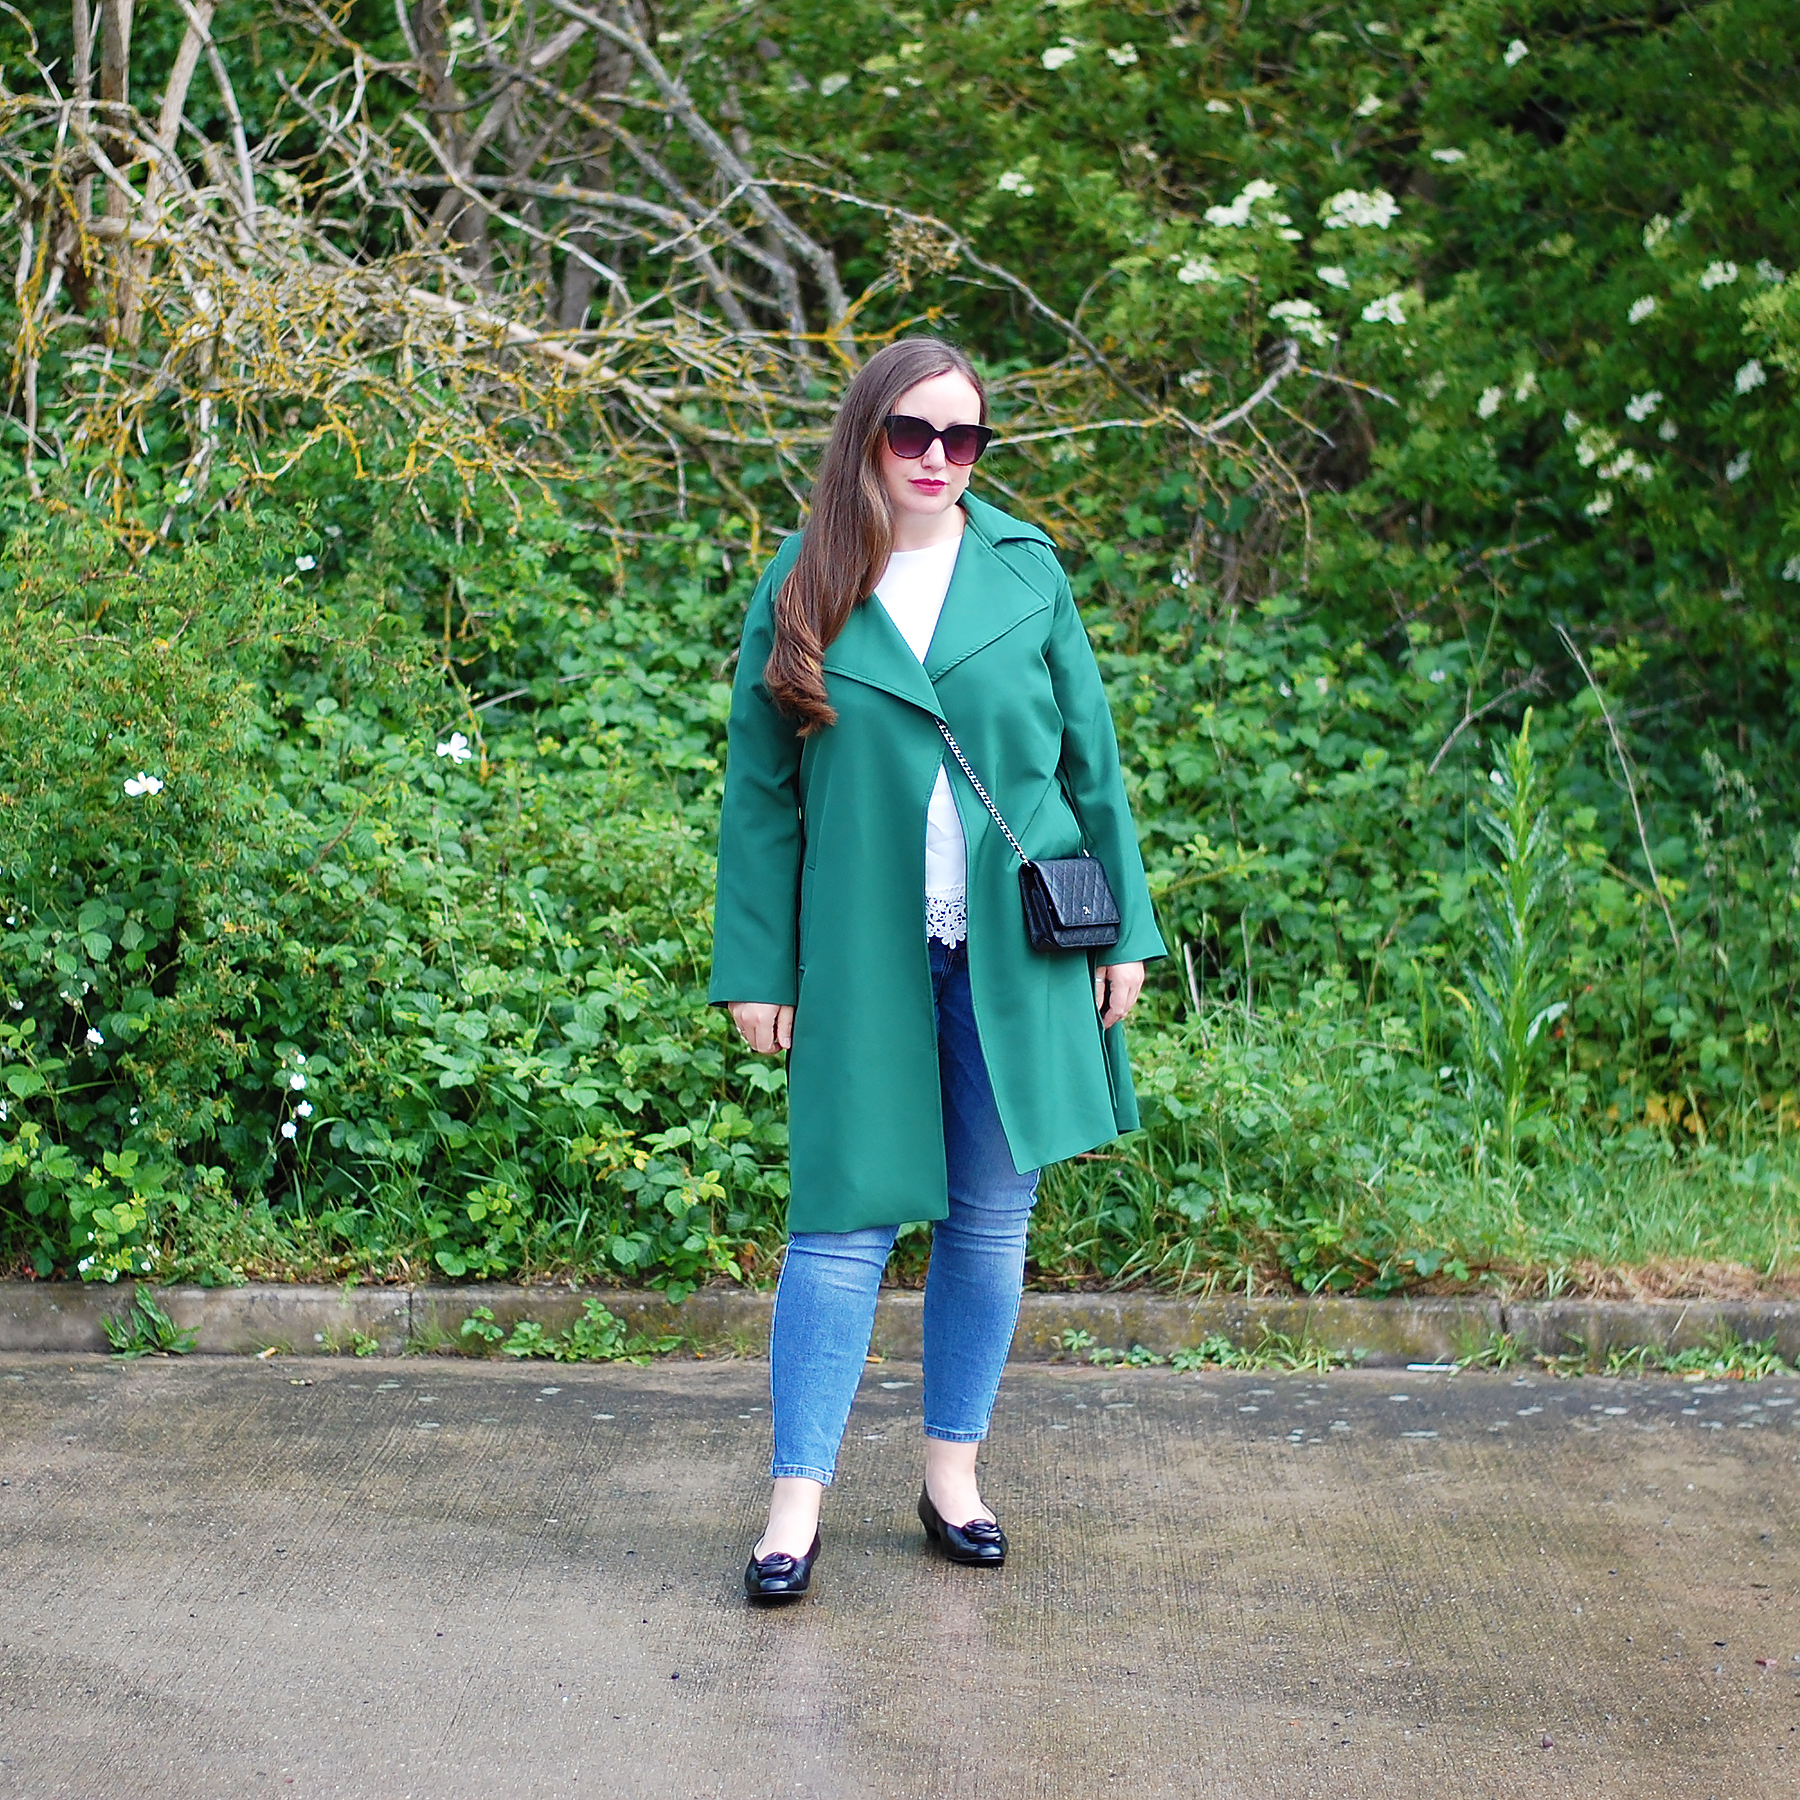 Ballerinas and trench coat outfit